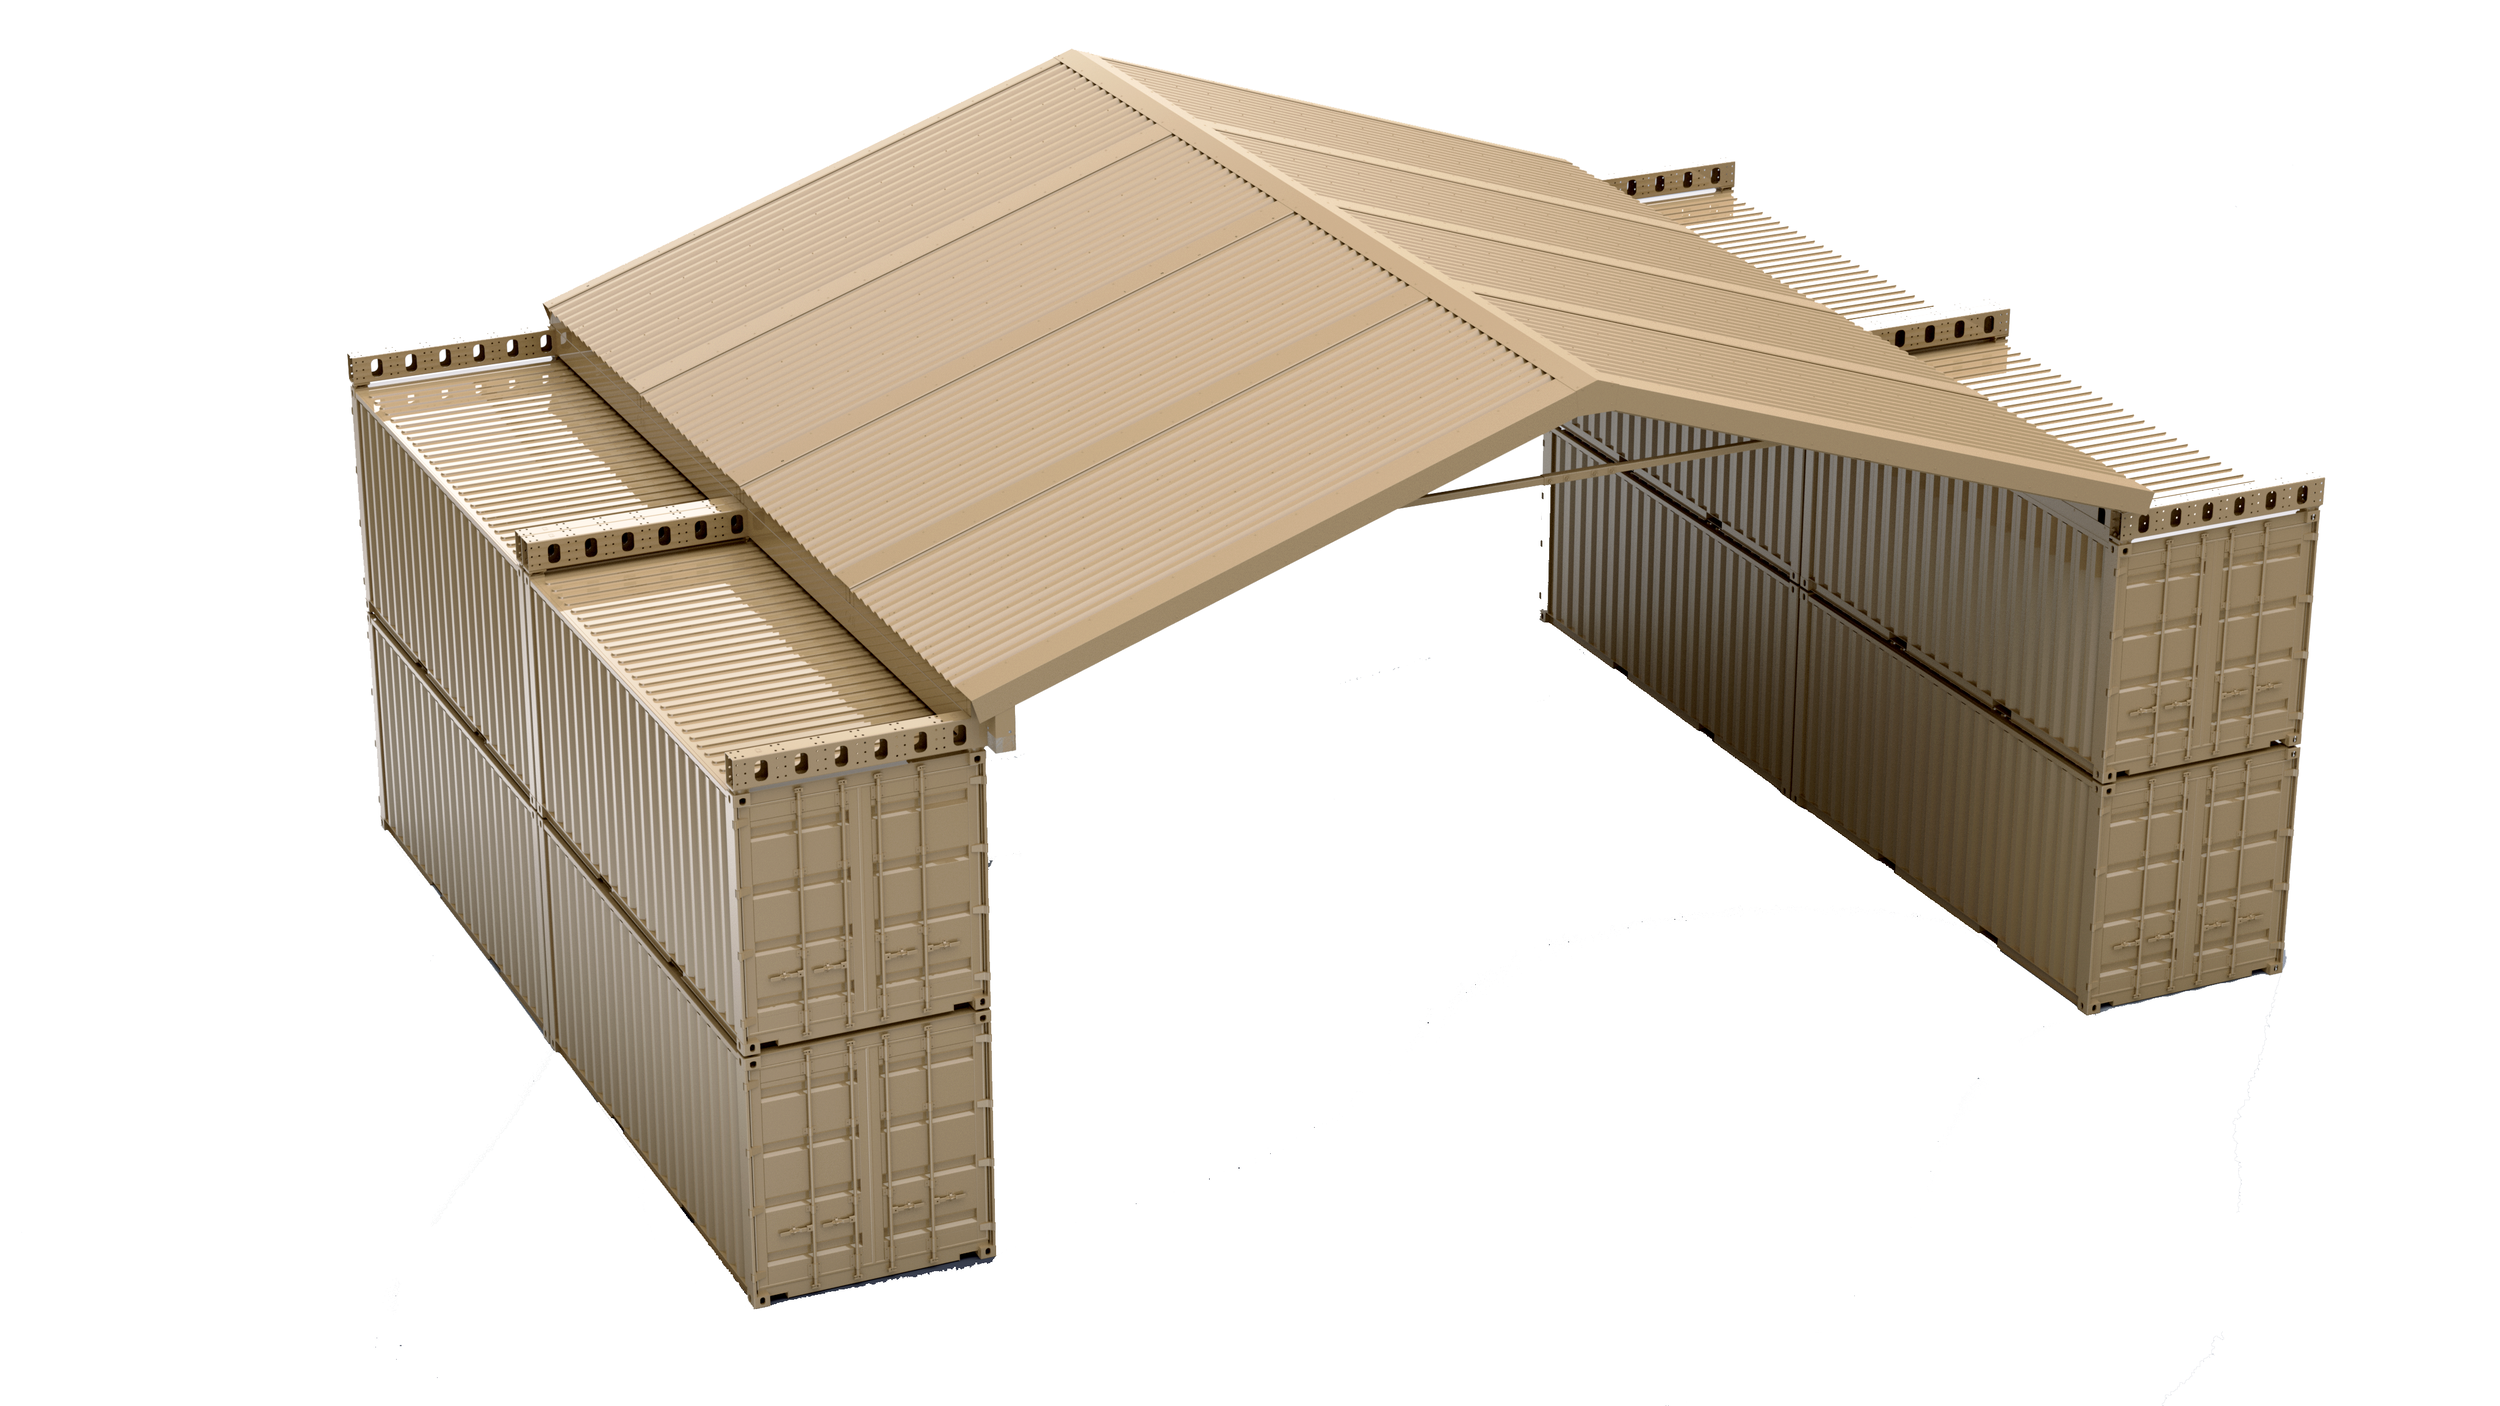  2 ea. CTR-3.0-4011 x 20’ units double stacked combined to create a 40x40 covered area 